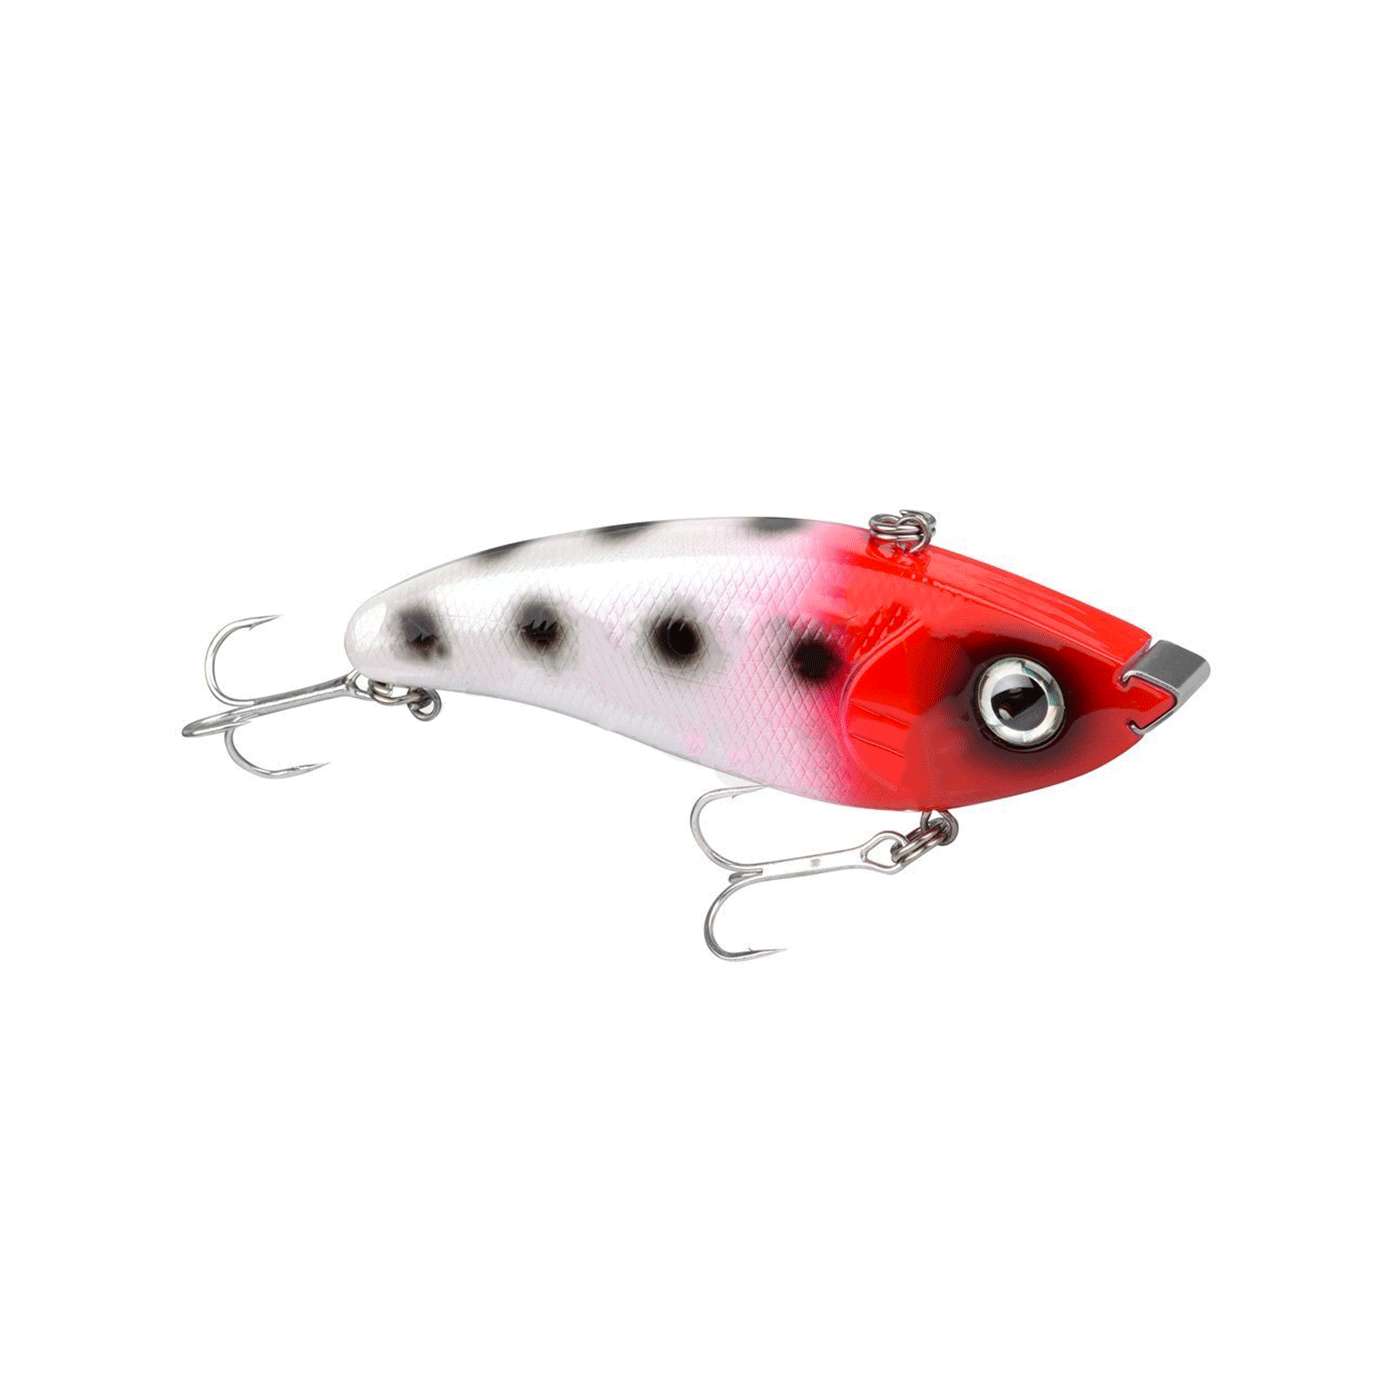 SPRO - SCREAMIN' DEVIL ND S128 Dotted Red Head Sinking